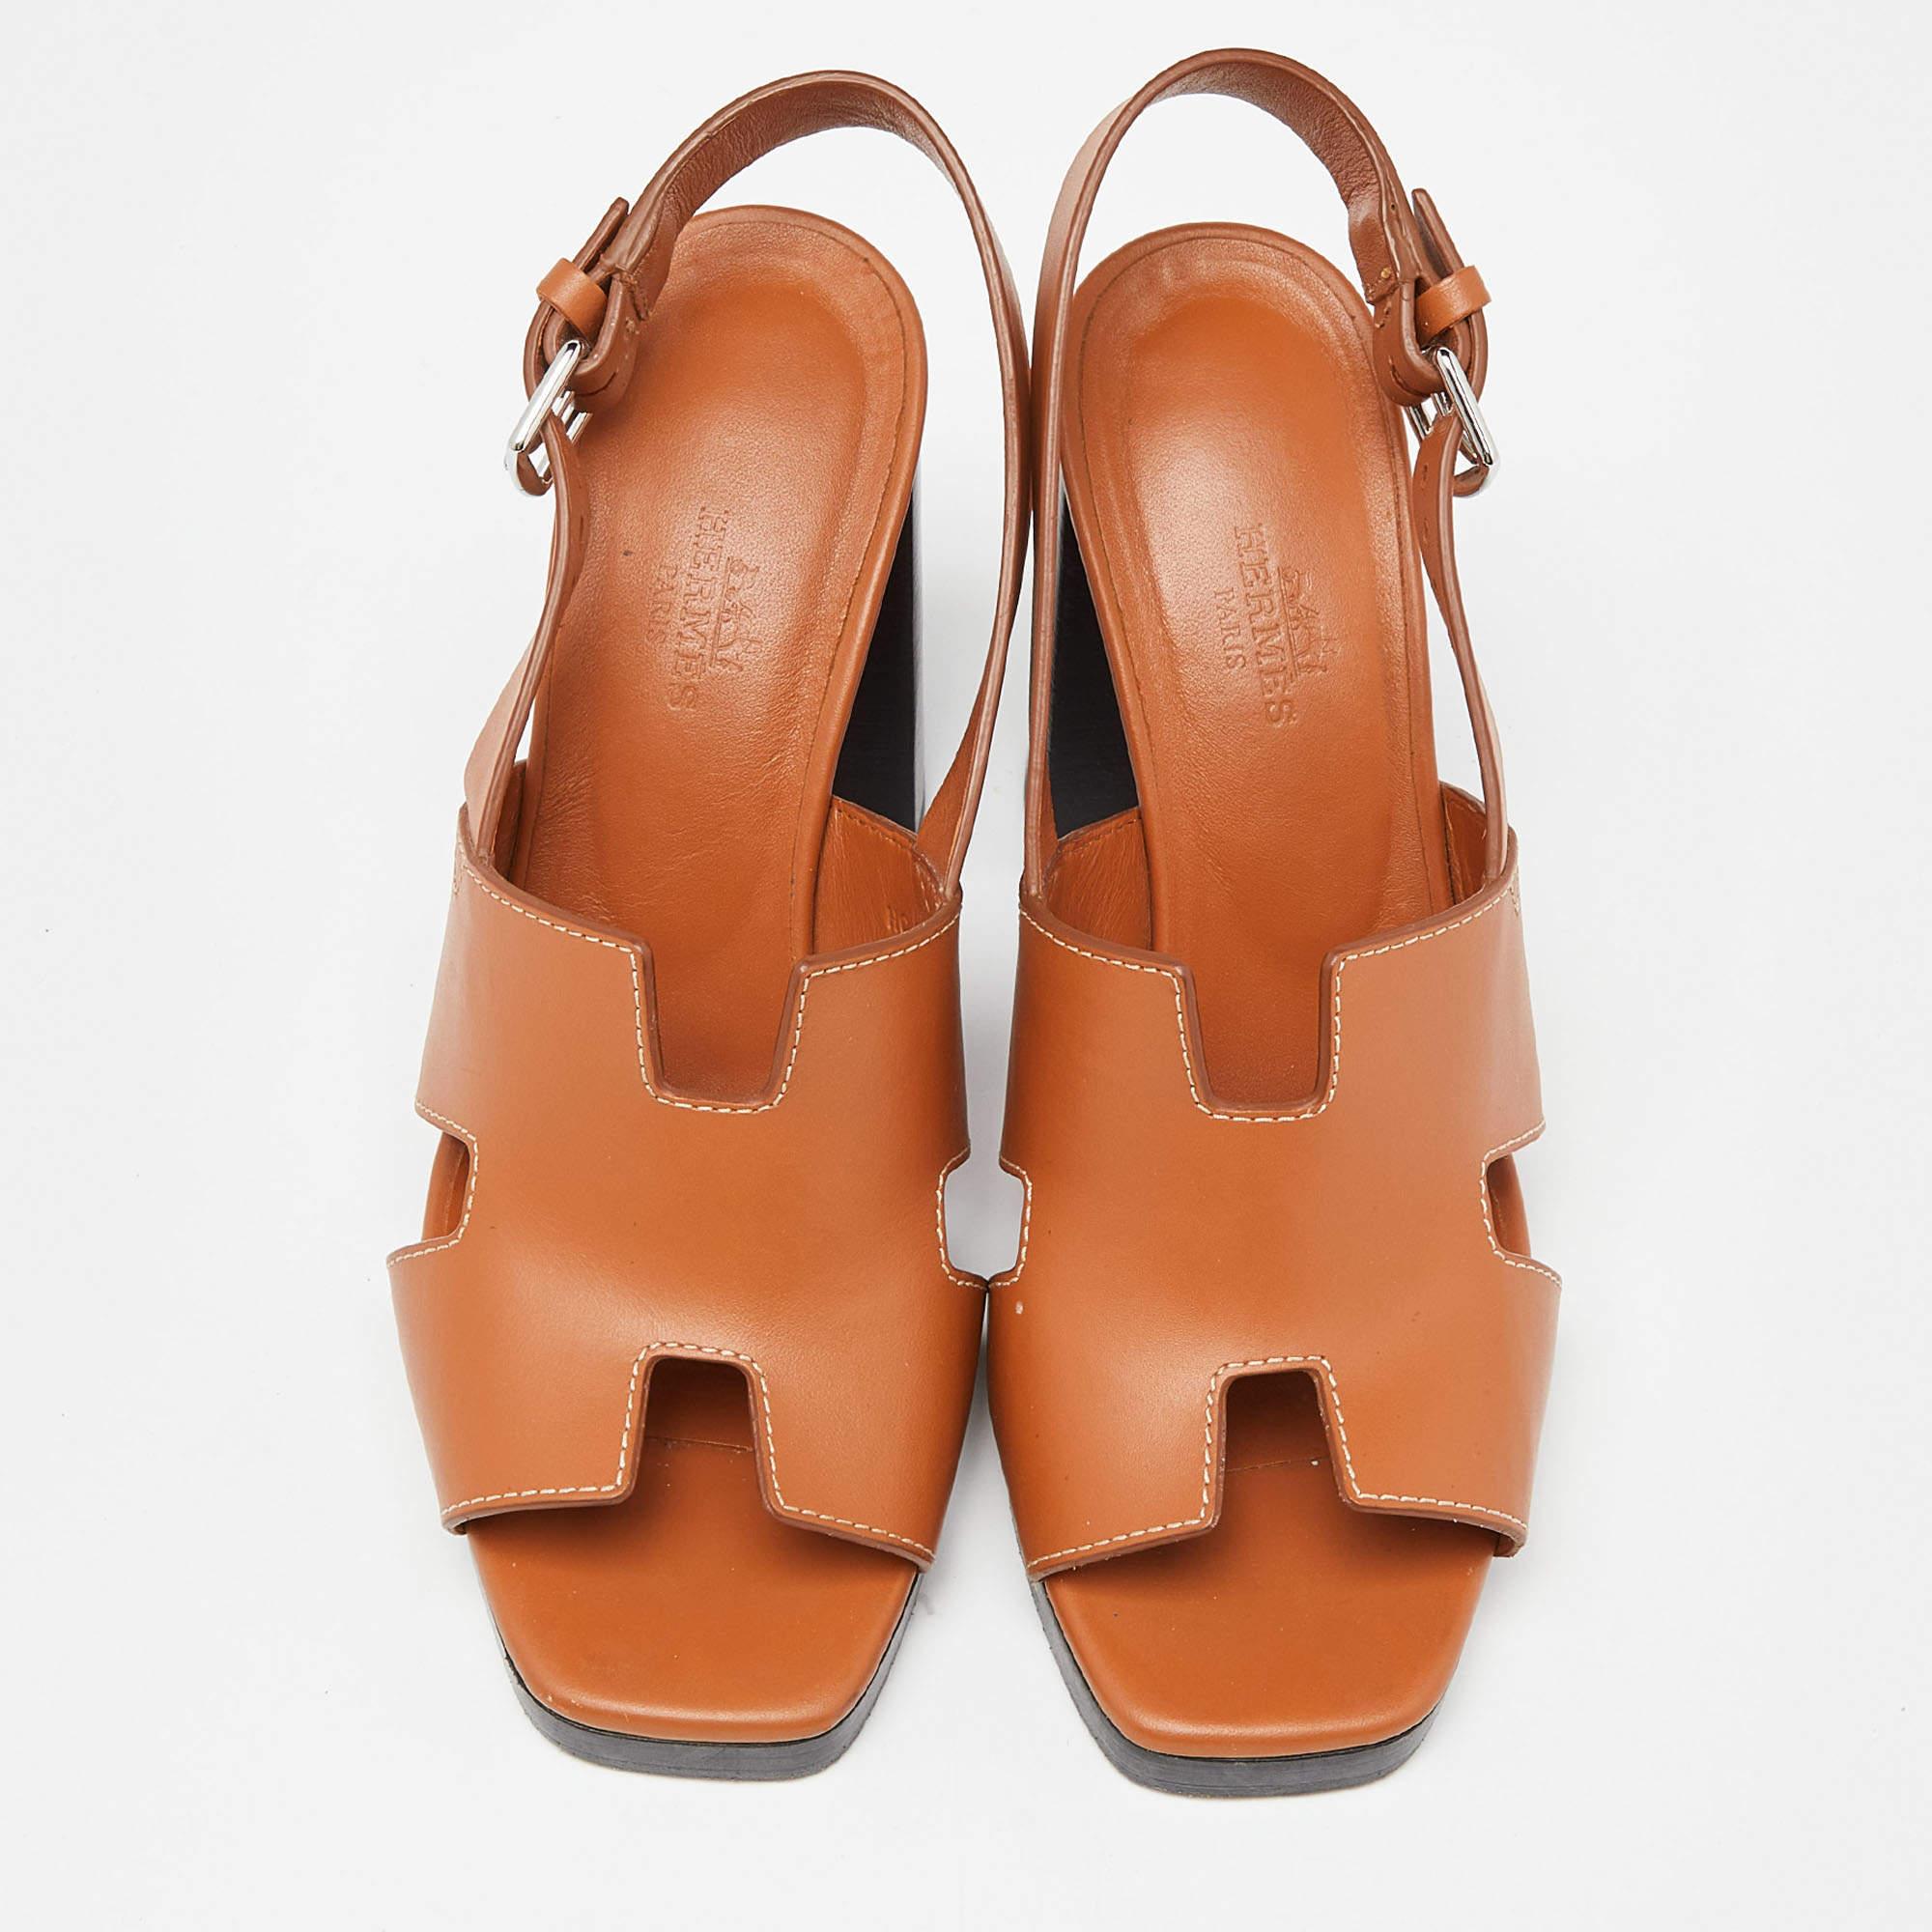 Make a statement with these Hermes leather sandals for women. Impeccably crafted, these chic heels offer both fashion and comfort, elevating your look with each graceful step.

Includes: Original Dustbag, Original Box, Invoice

